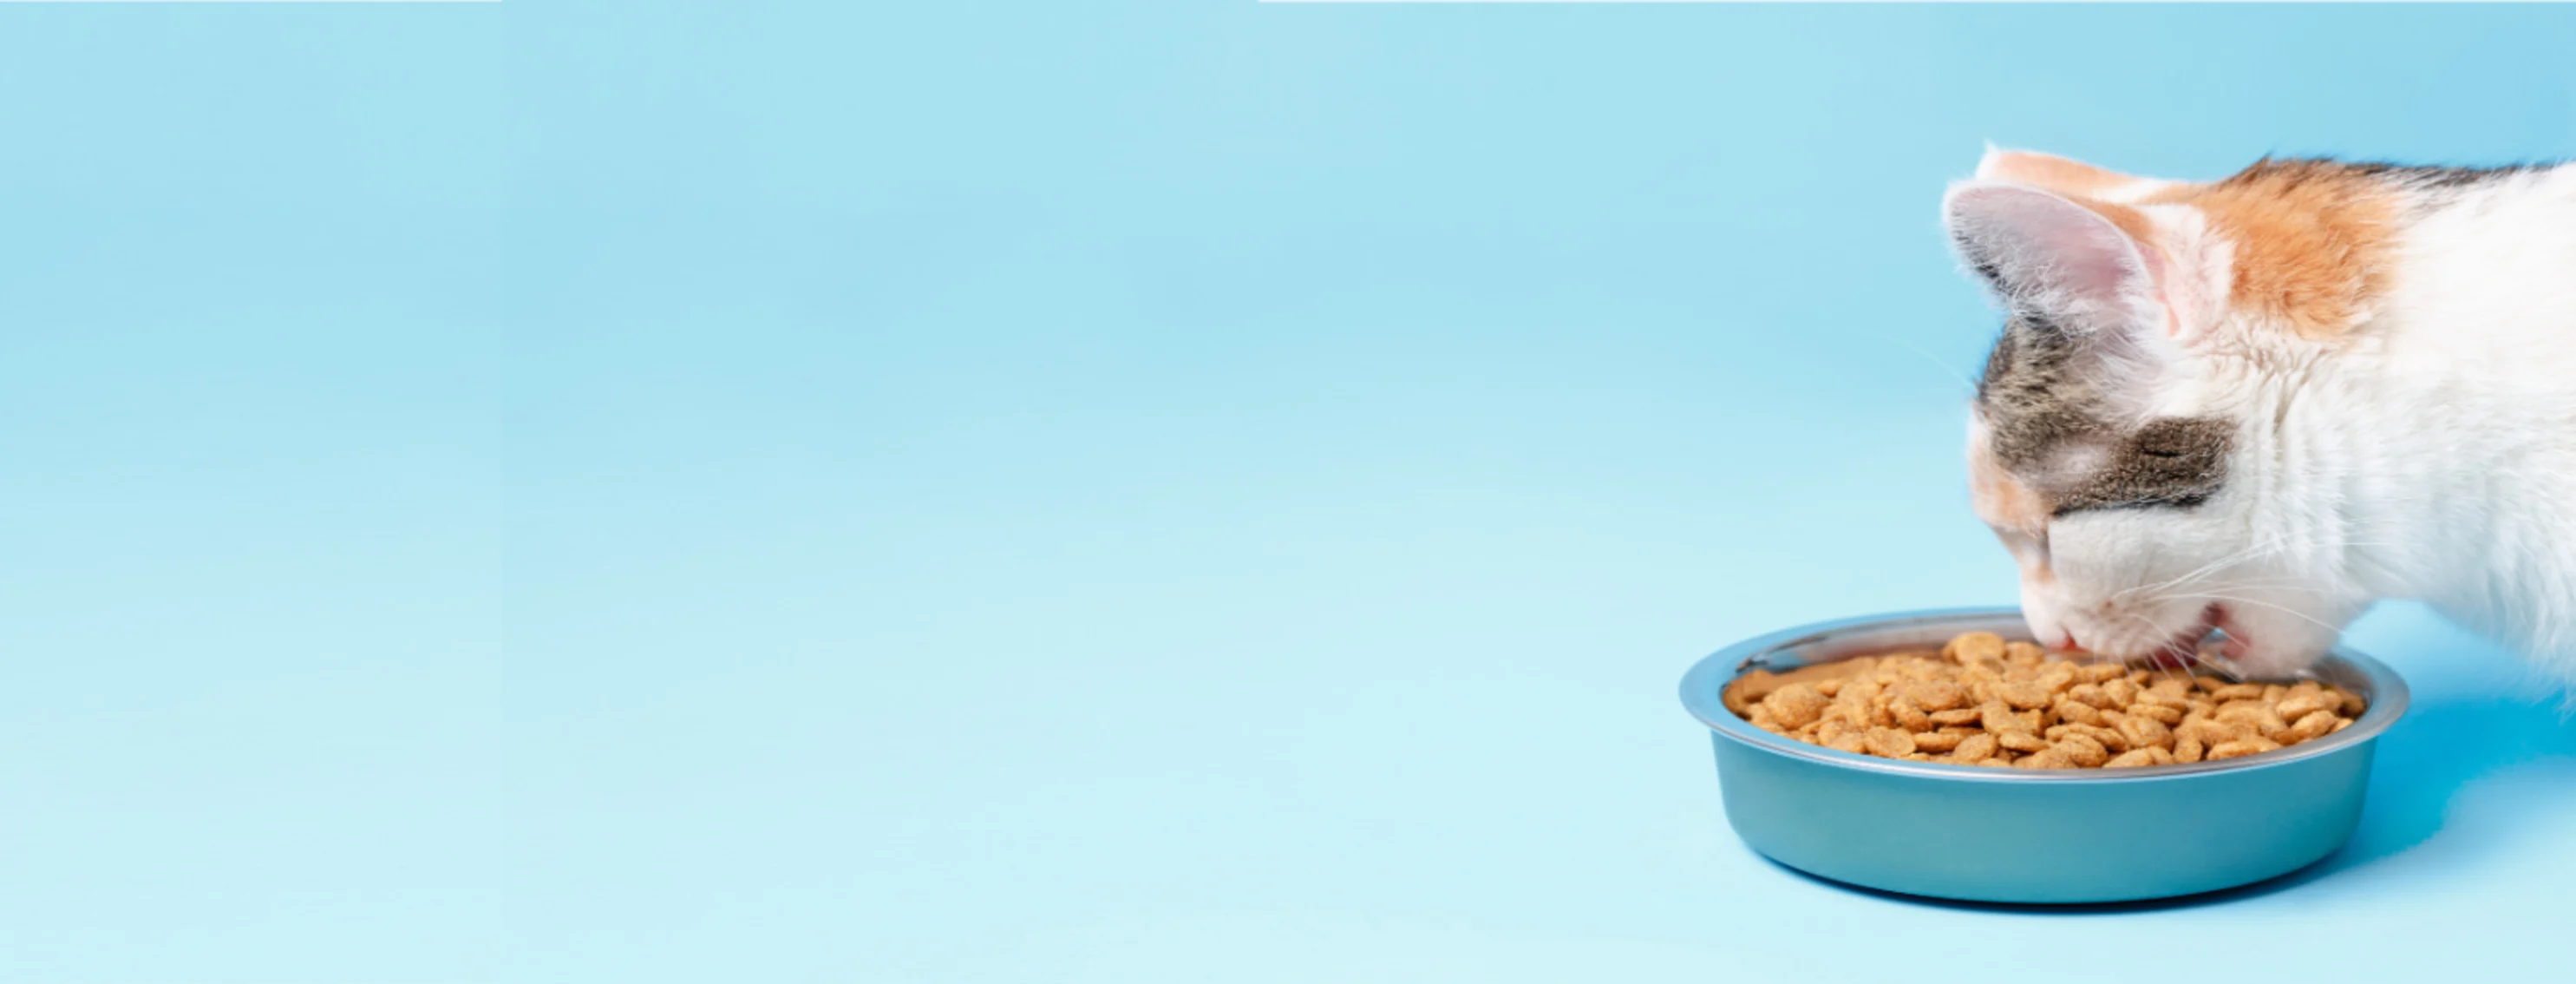 Cat eating from food bowl with a blue studio background